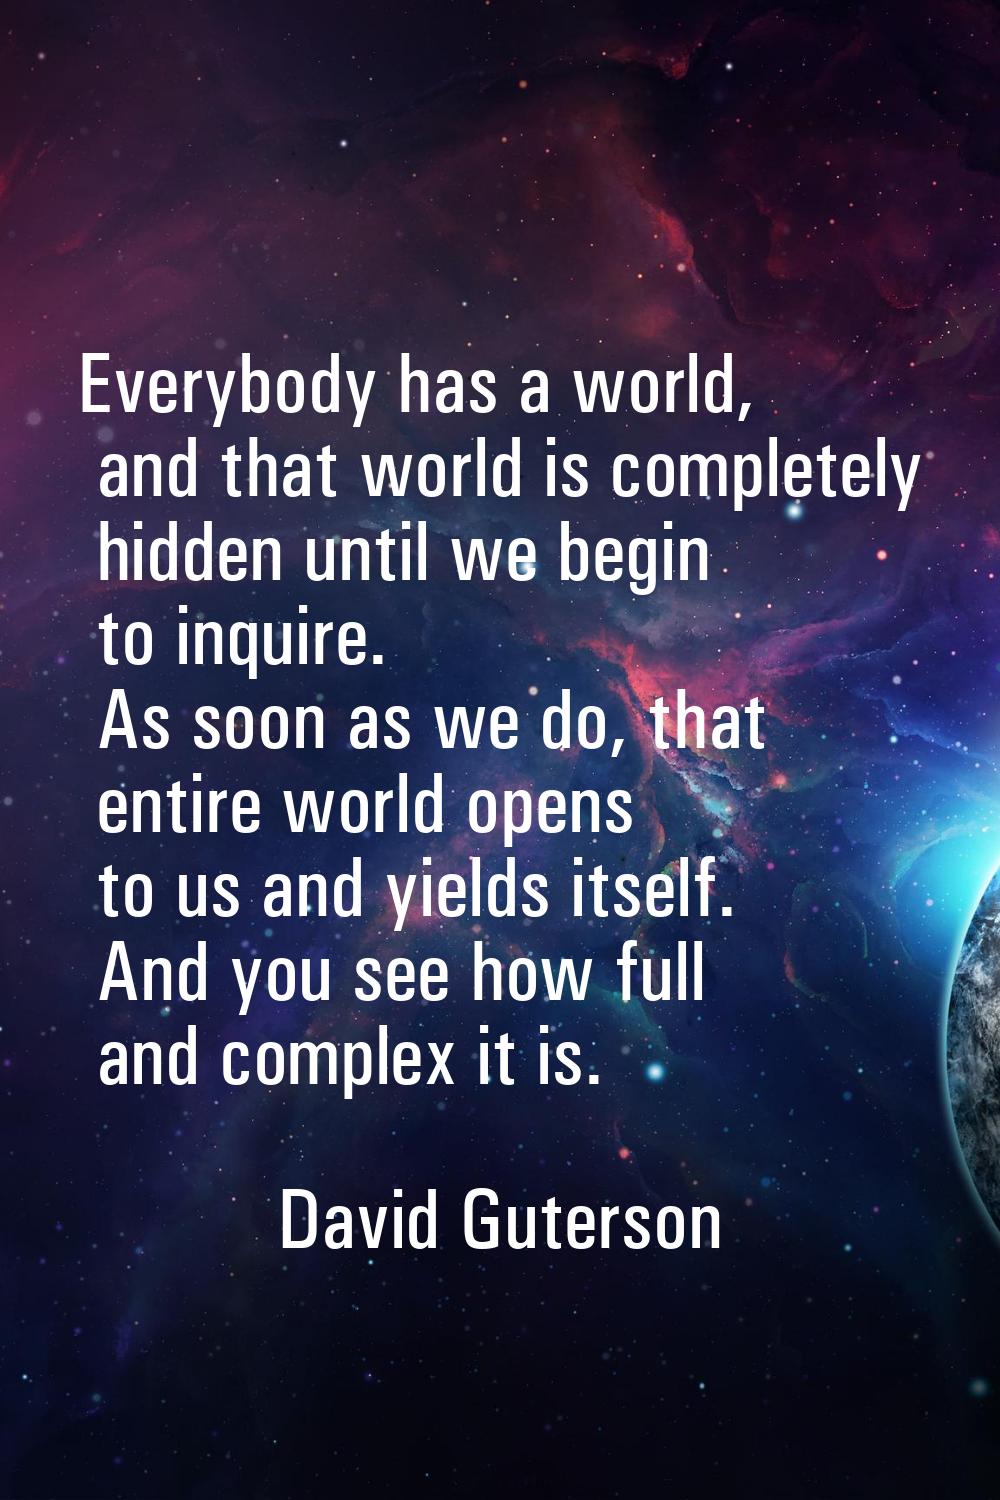 Everybody has a world, and that world is completely hidden until we begin to inquire. As soon as we